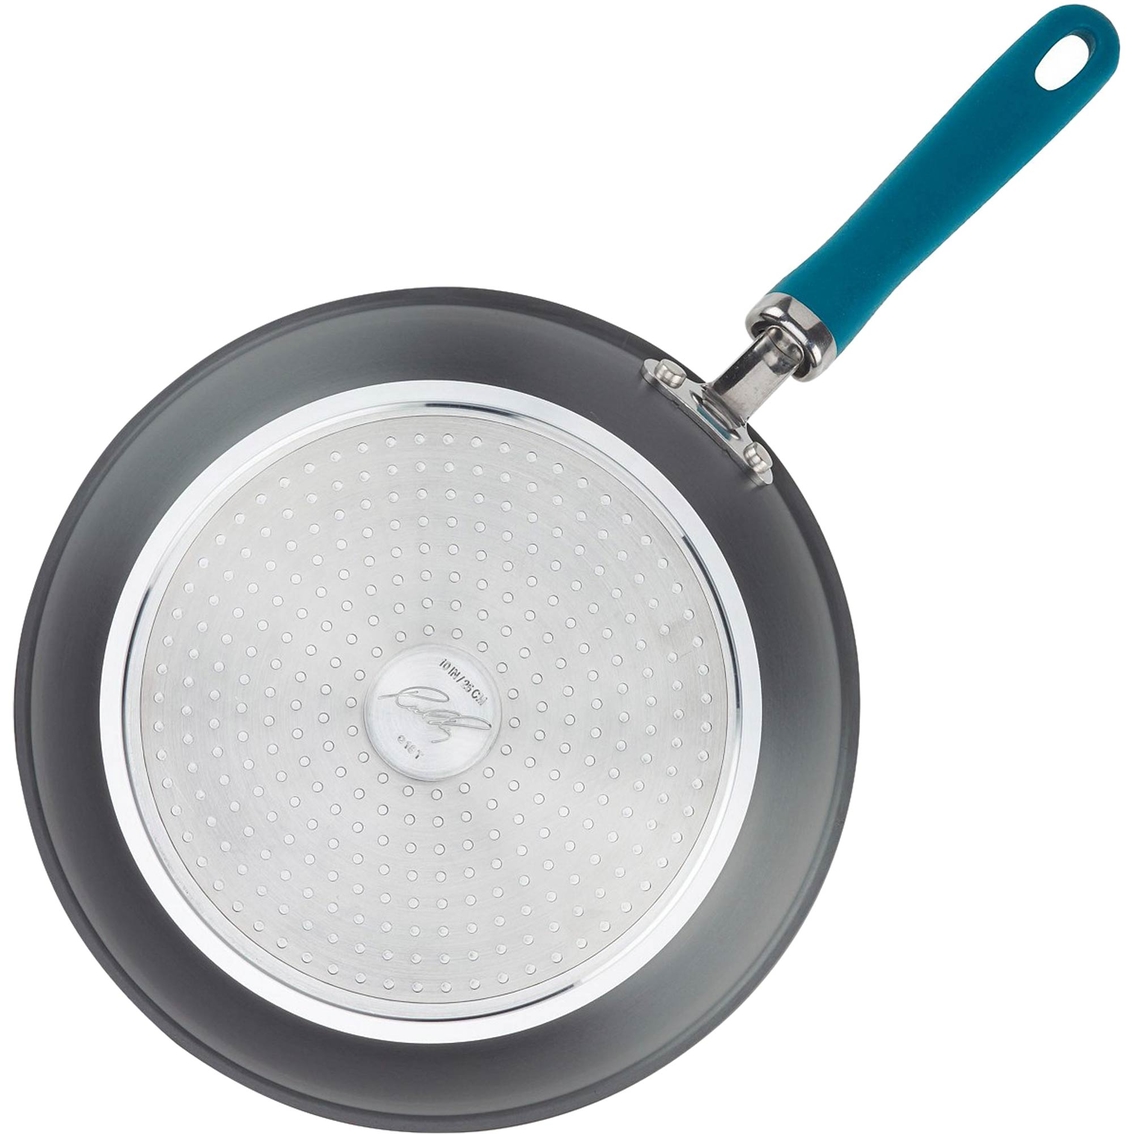 Rachael Ray Create Delicious Hard Anodized Aluminum Nonstick 11 pc. Cookware Set - Image 5 of 7